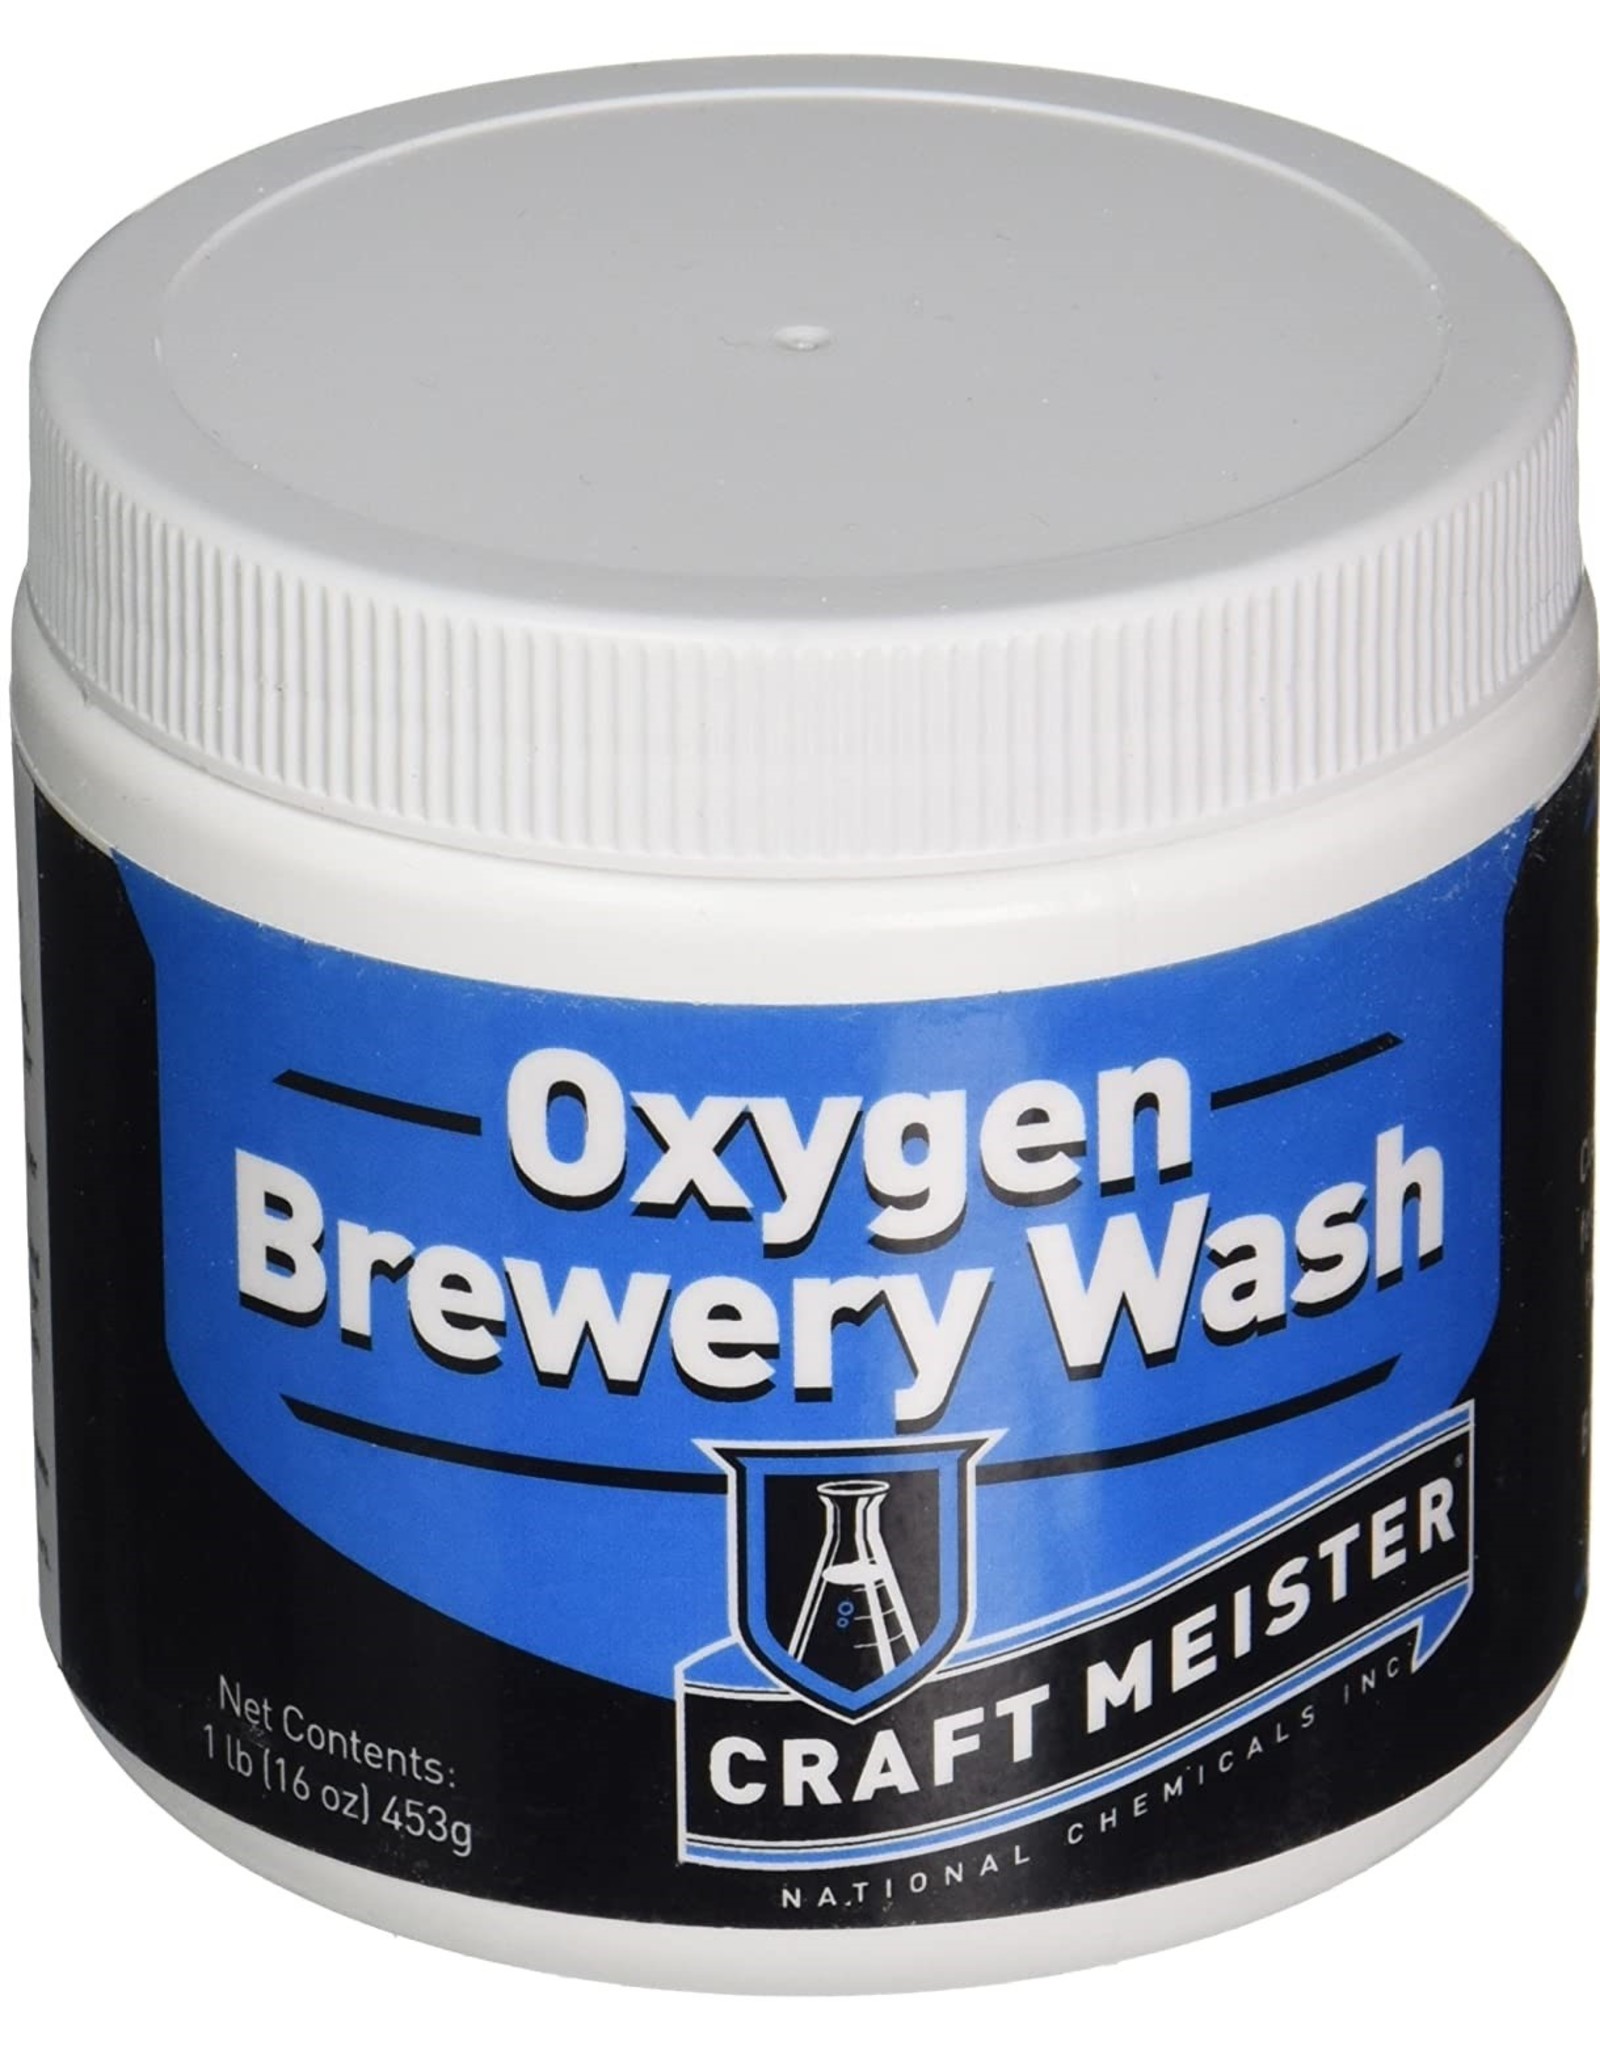 Craftmeister Oxygen Brewery Wash 1 LB